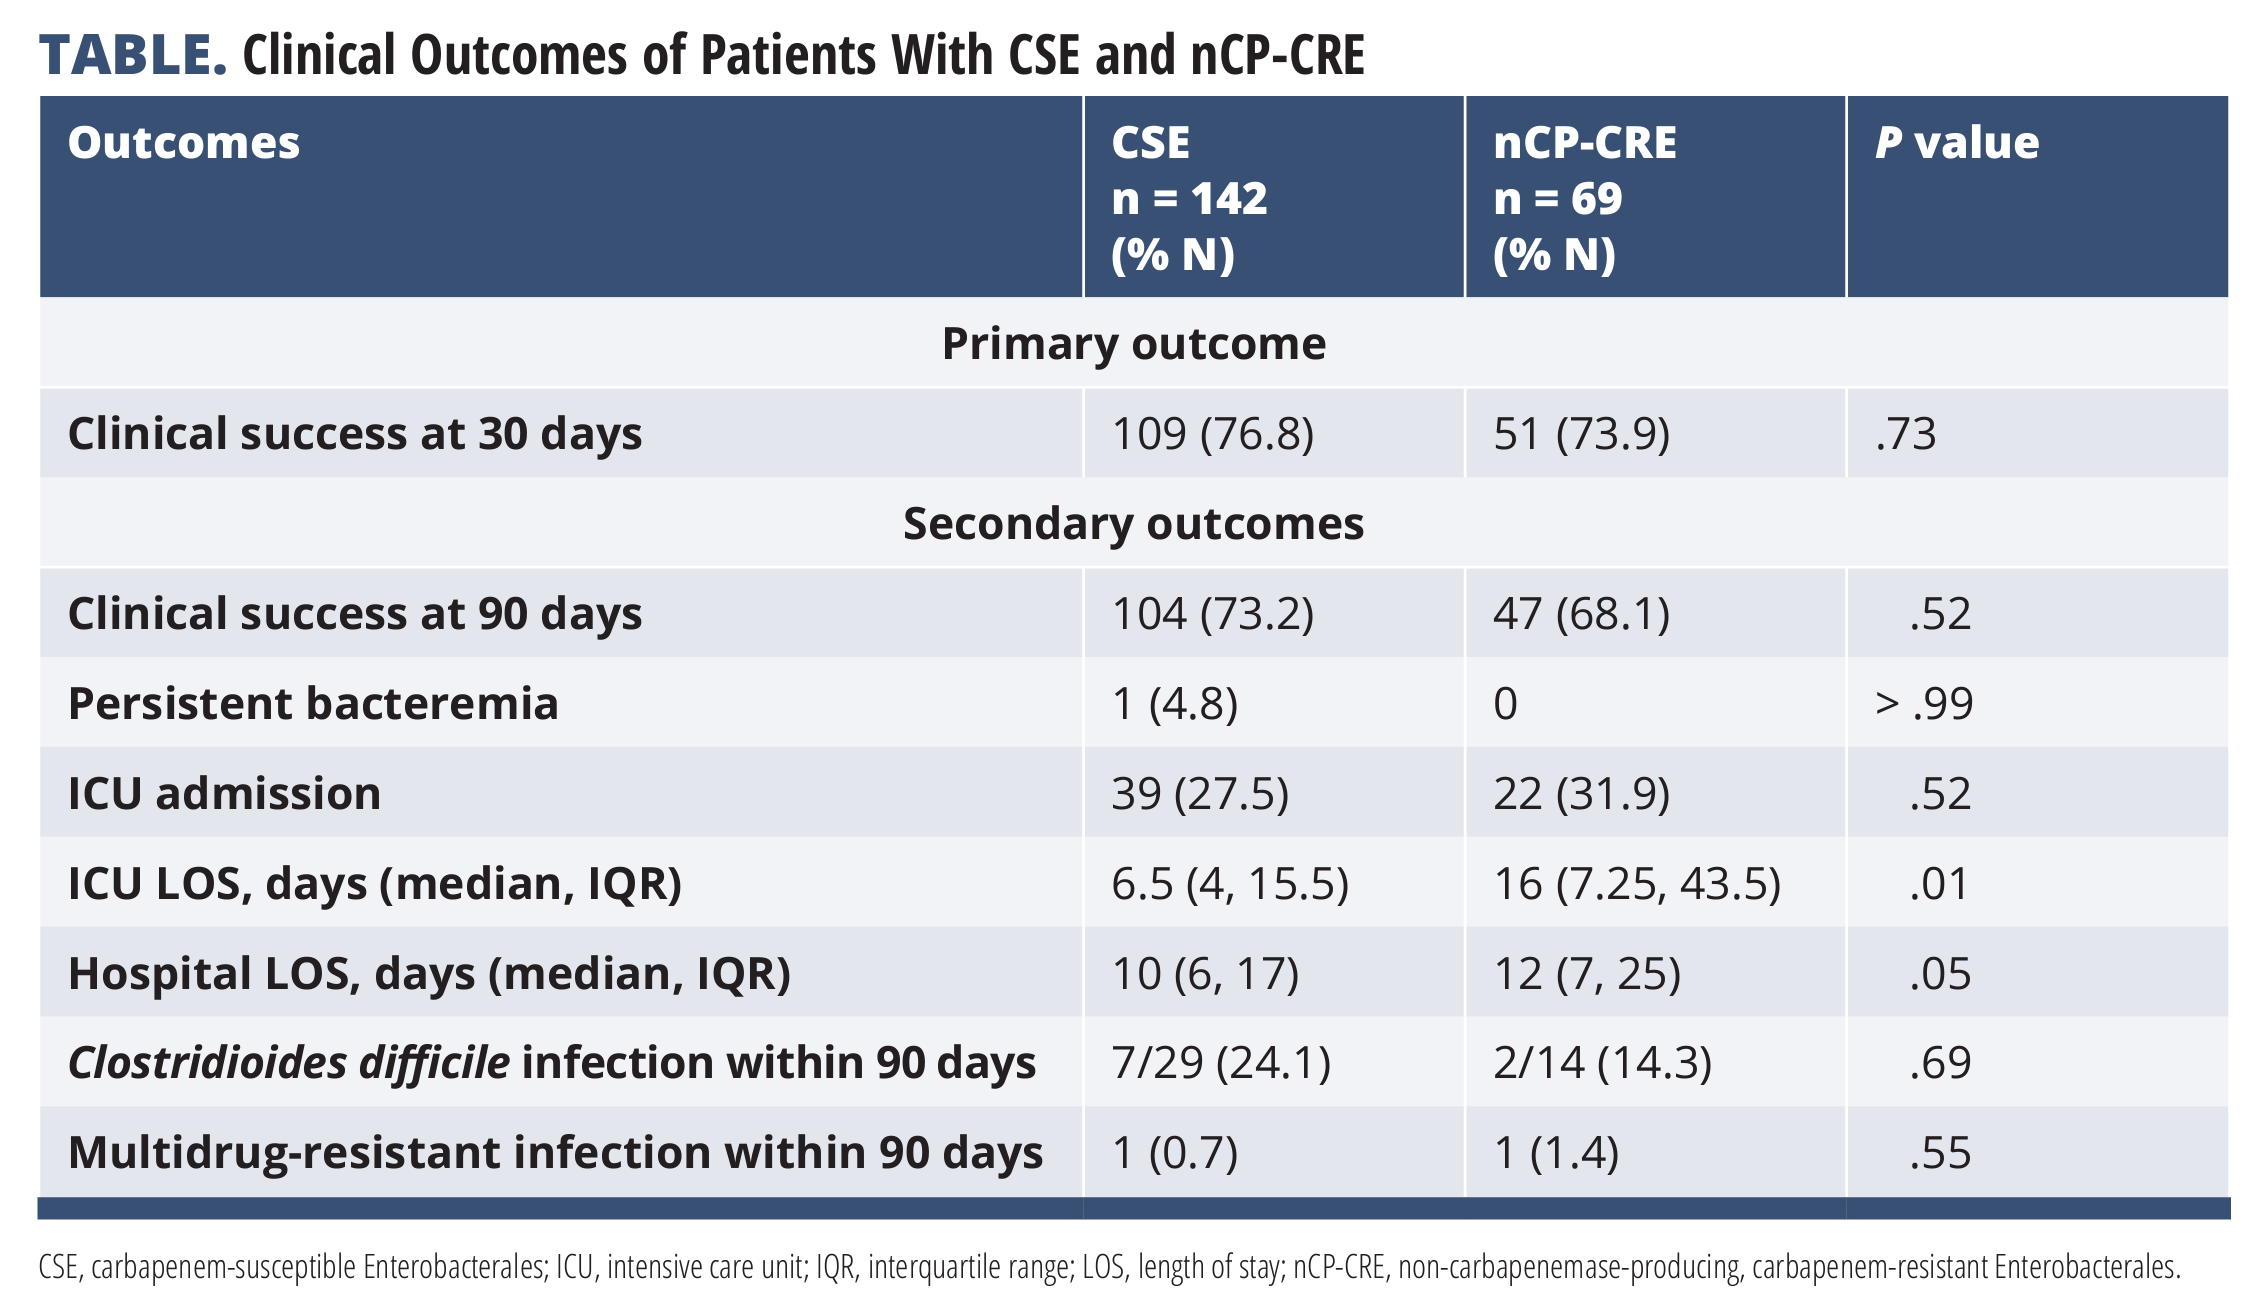 This was the first study to compare clinical outcomes in carbapenemase-producing (CP-CRE) and non–carbapenemase-producing (nCP-CRE) infections.